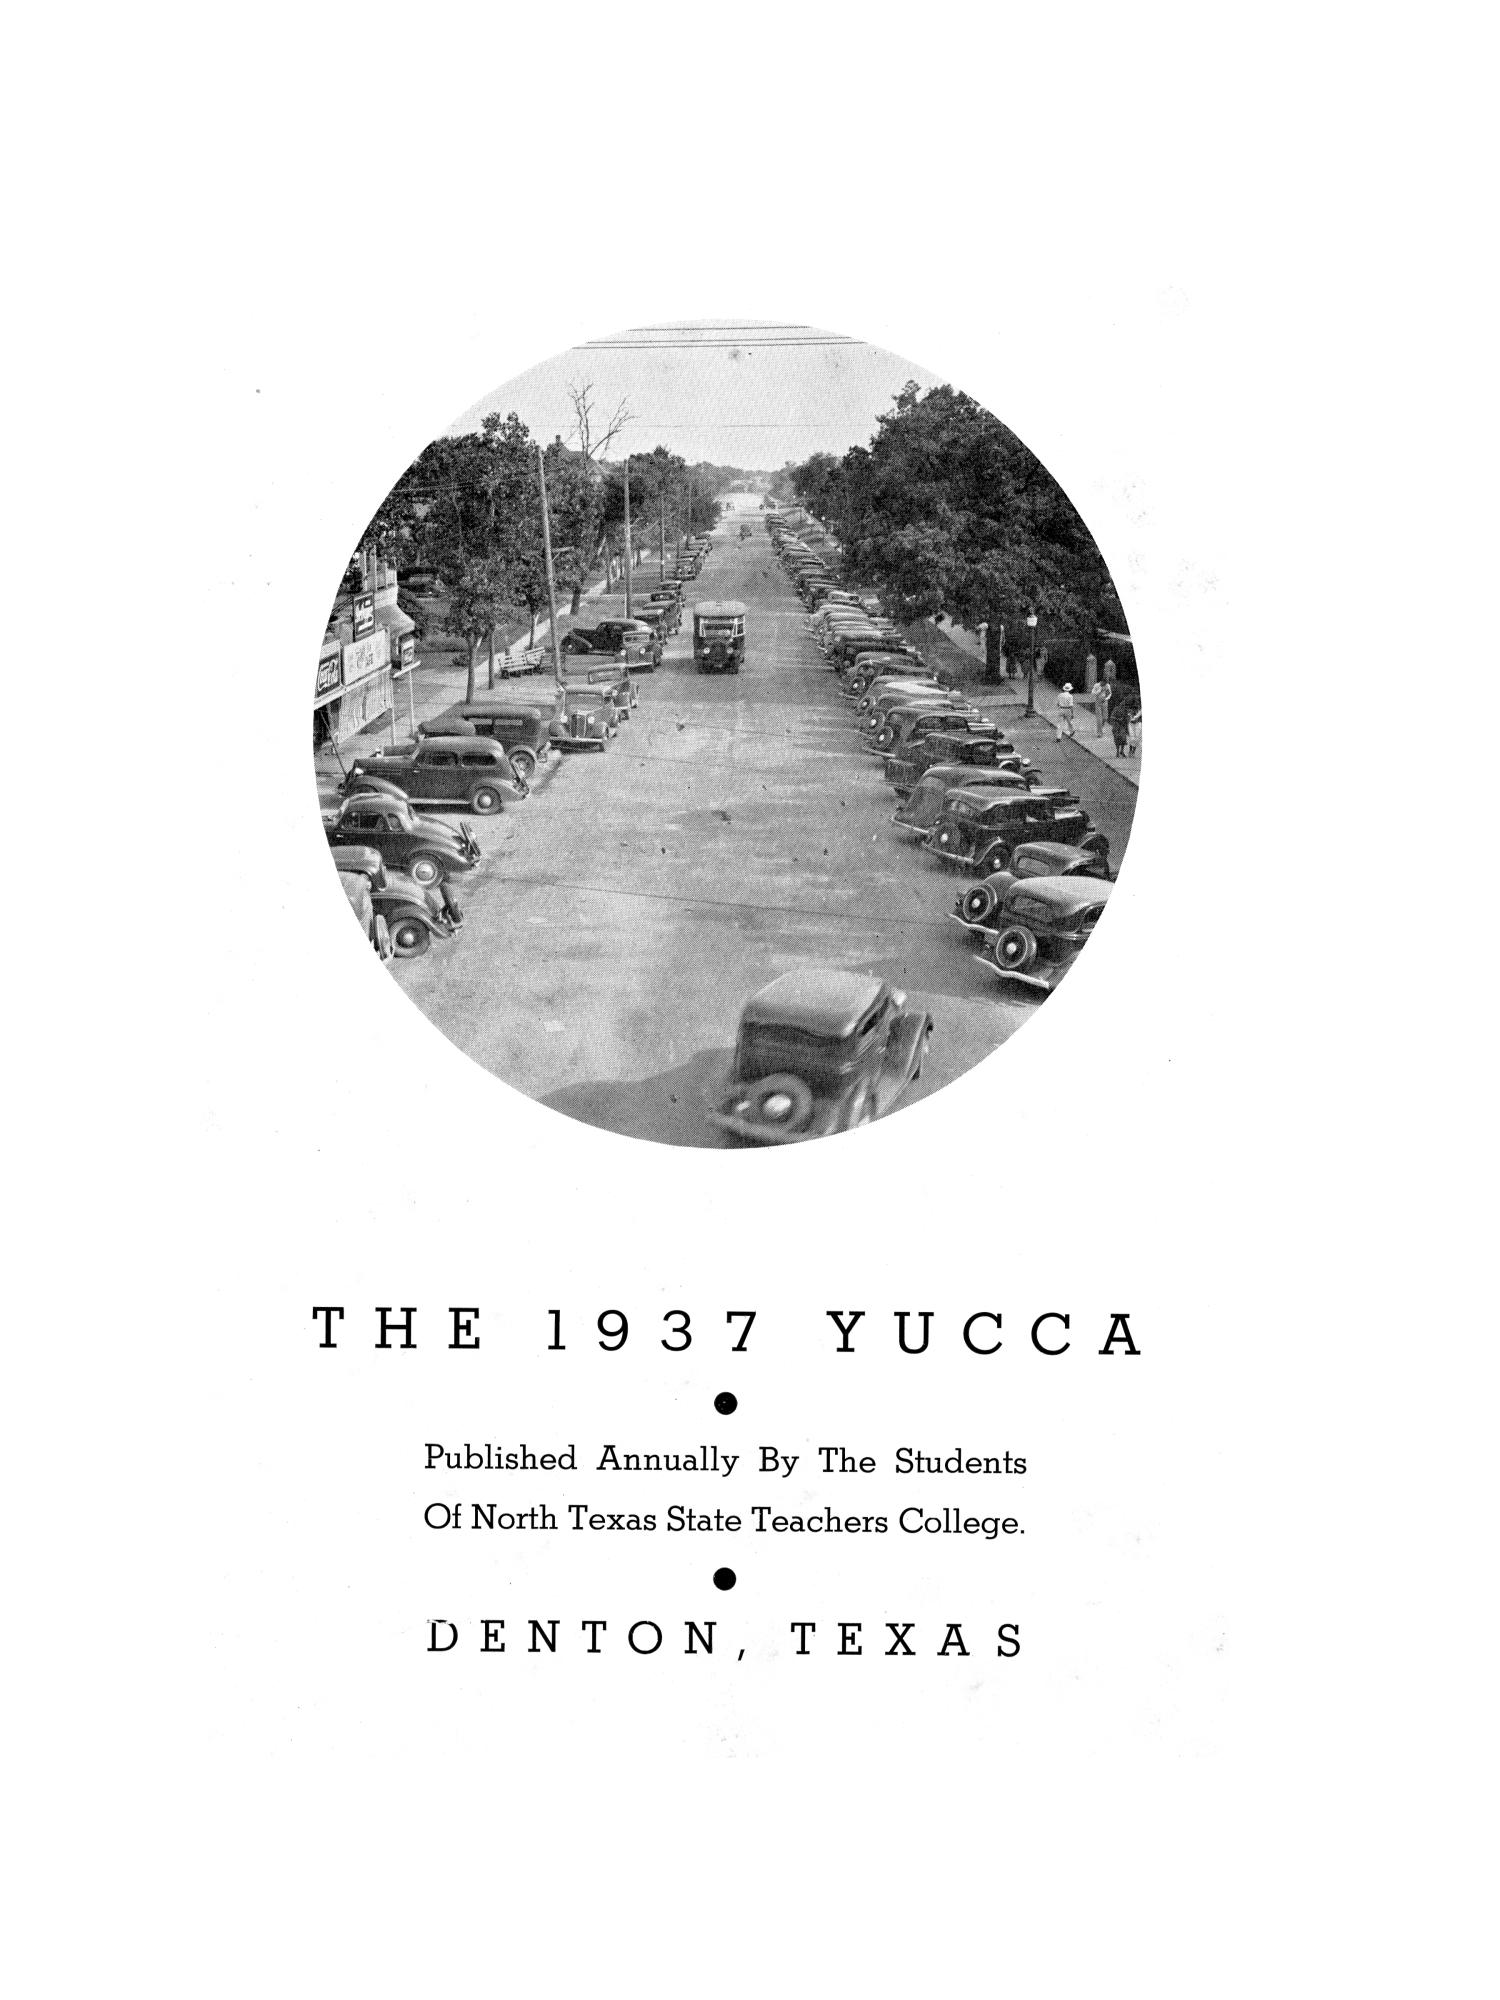 The Yucca, Yearbook of North Texas State Teacher's College, 1937
                                                
                                                    1
                                                